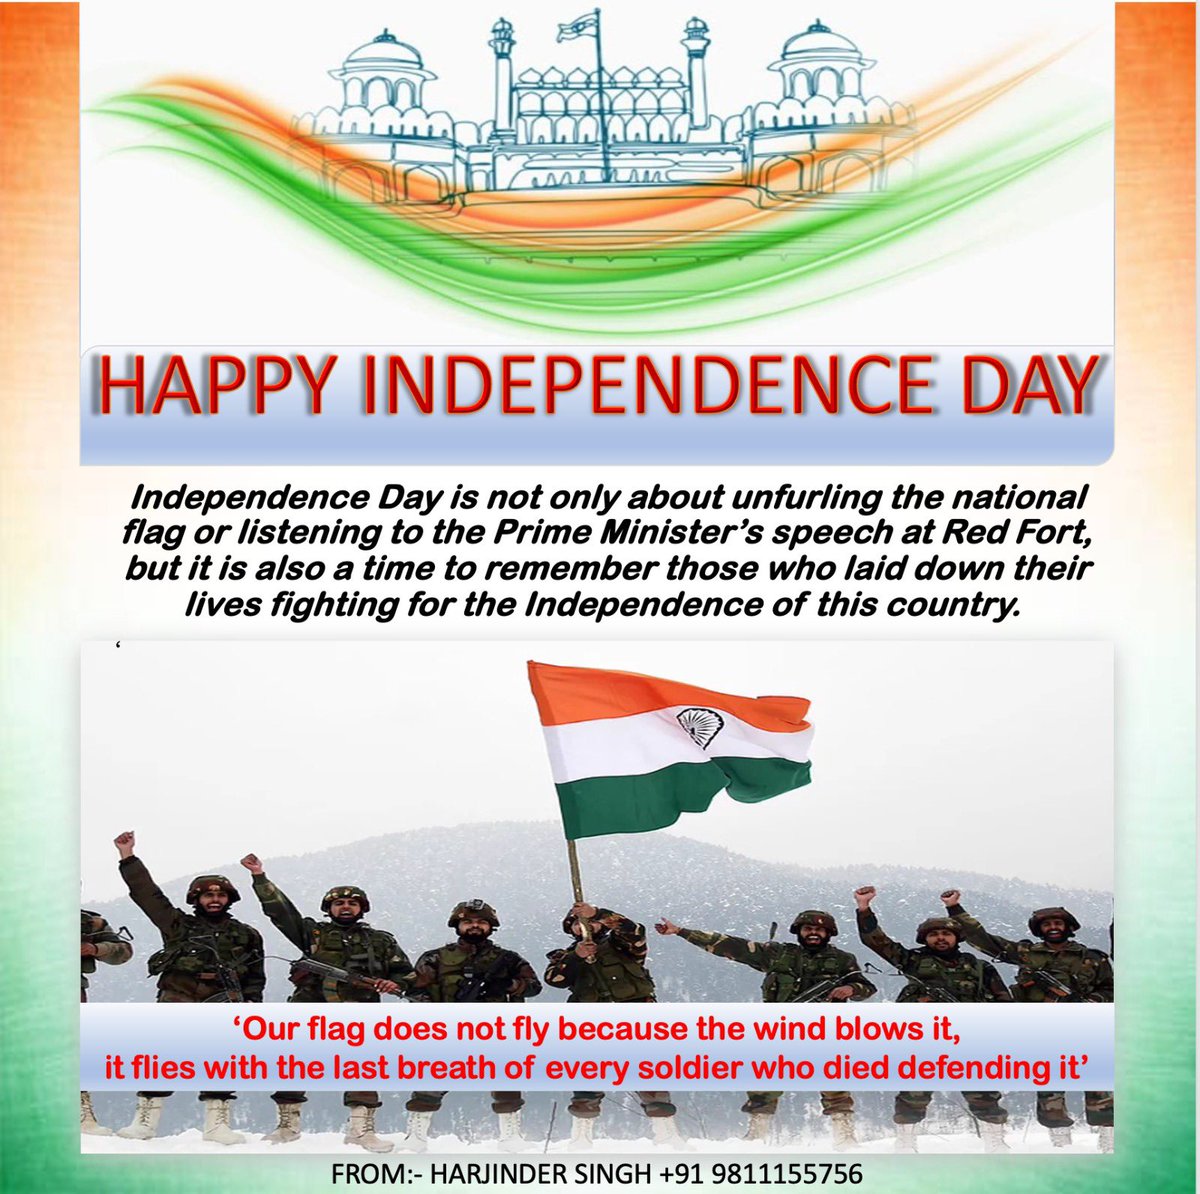 #HappyIndependenceDay Do remember all the #freedomfightersofindia and #IndianSoldiers on this day. @pmooffice110011 @indianarmy.adgpi @narendramodi @bjp4india